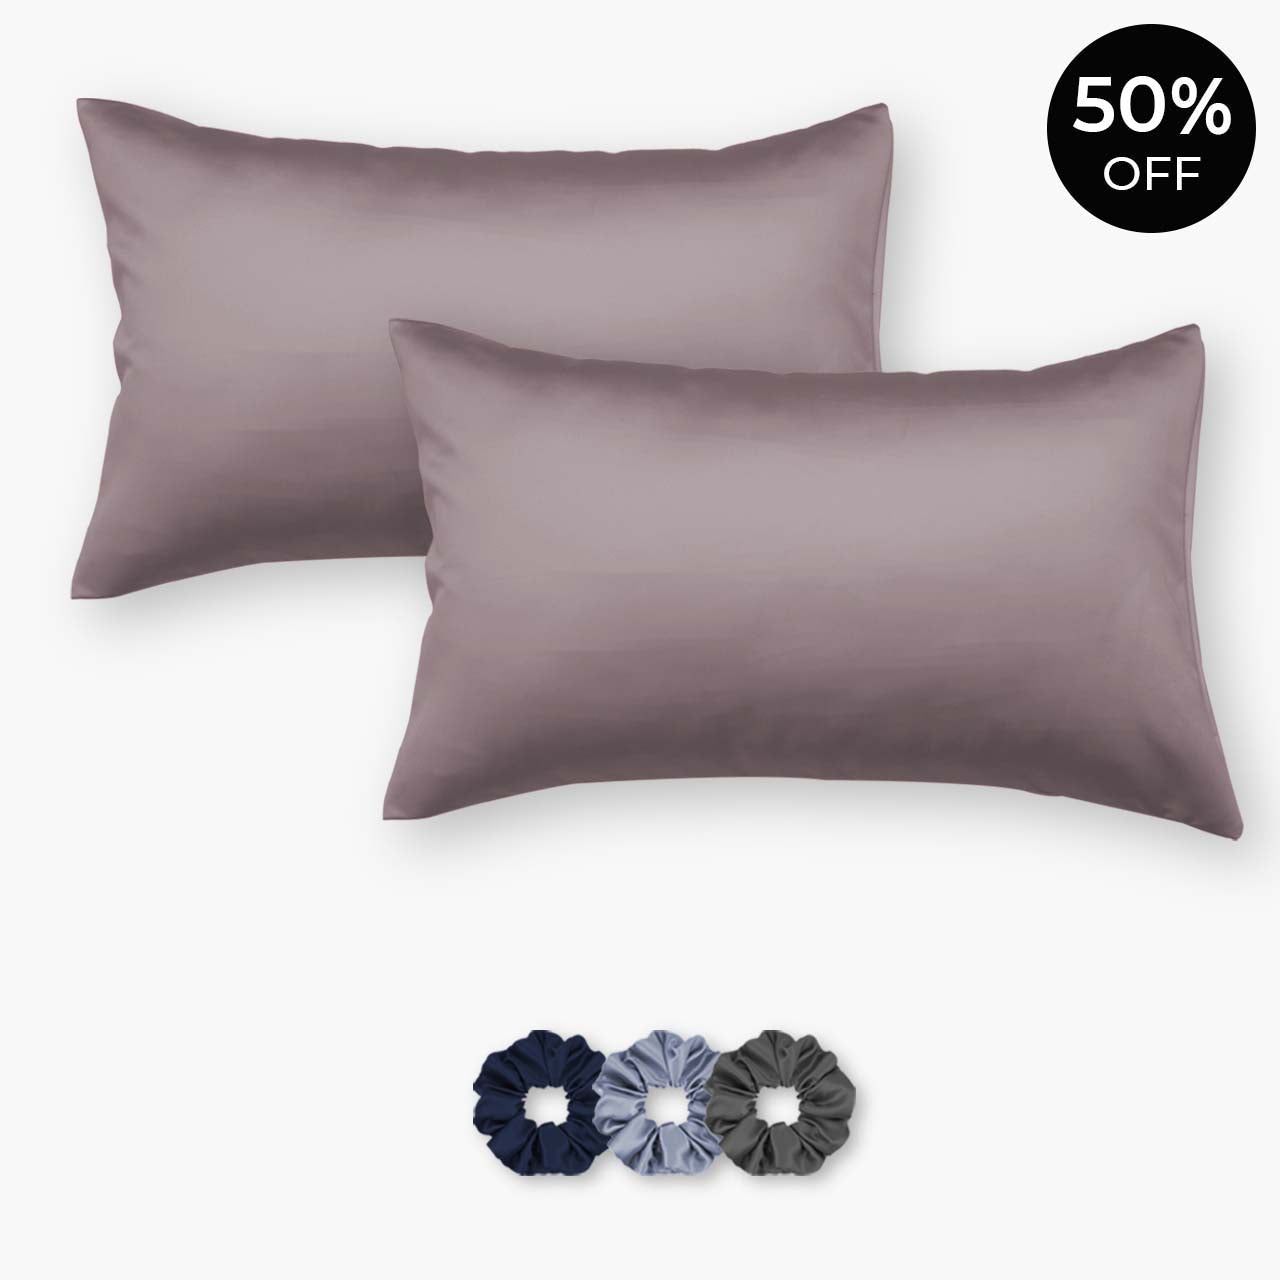 Purple Satin Pillowcases - Set of 2 (With 3 Free Scrunchies)